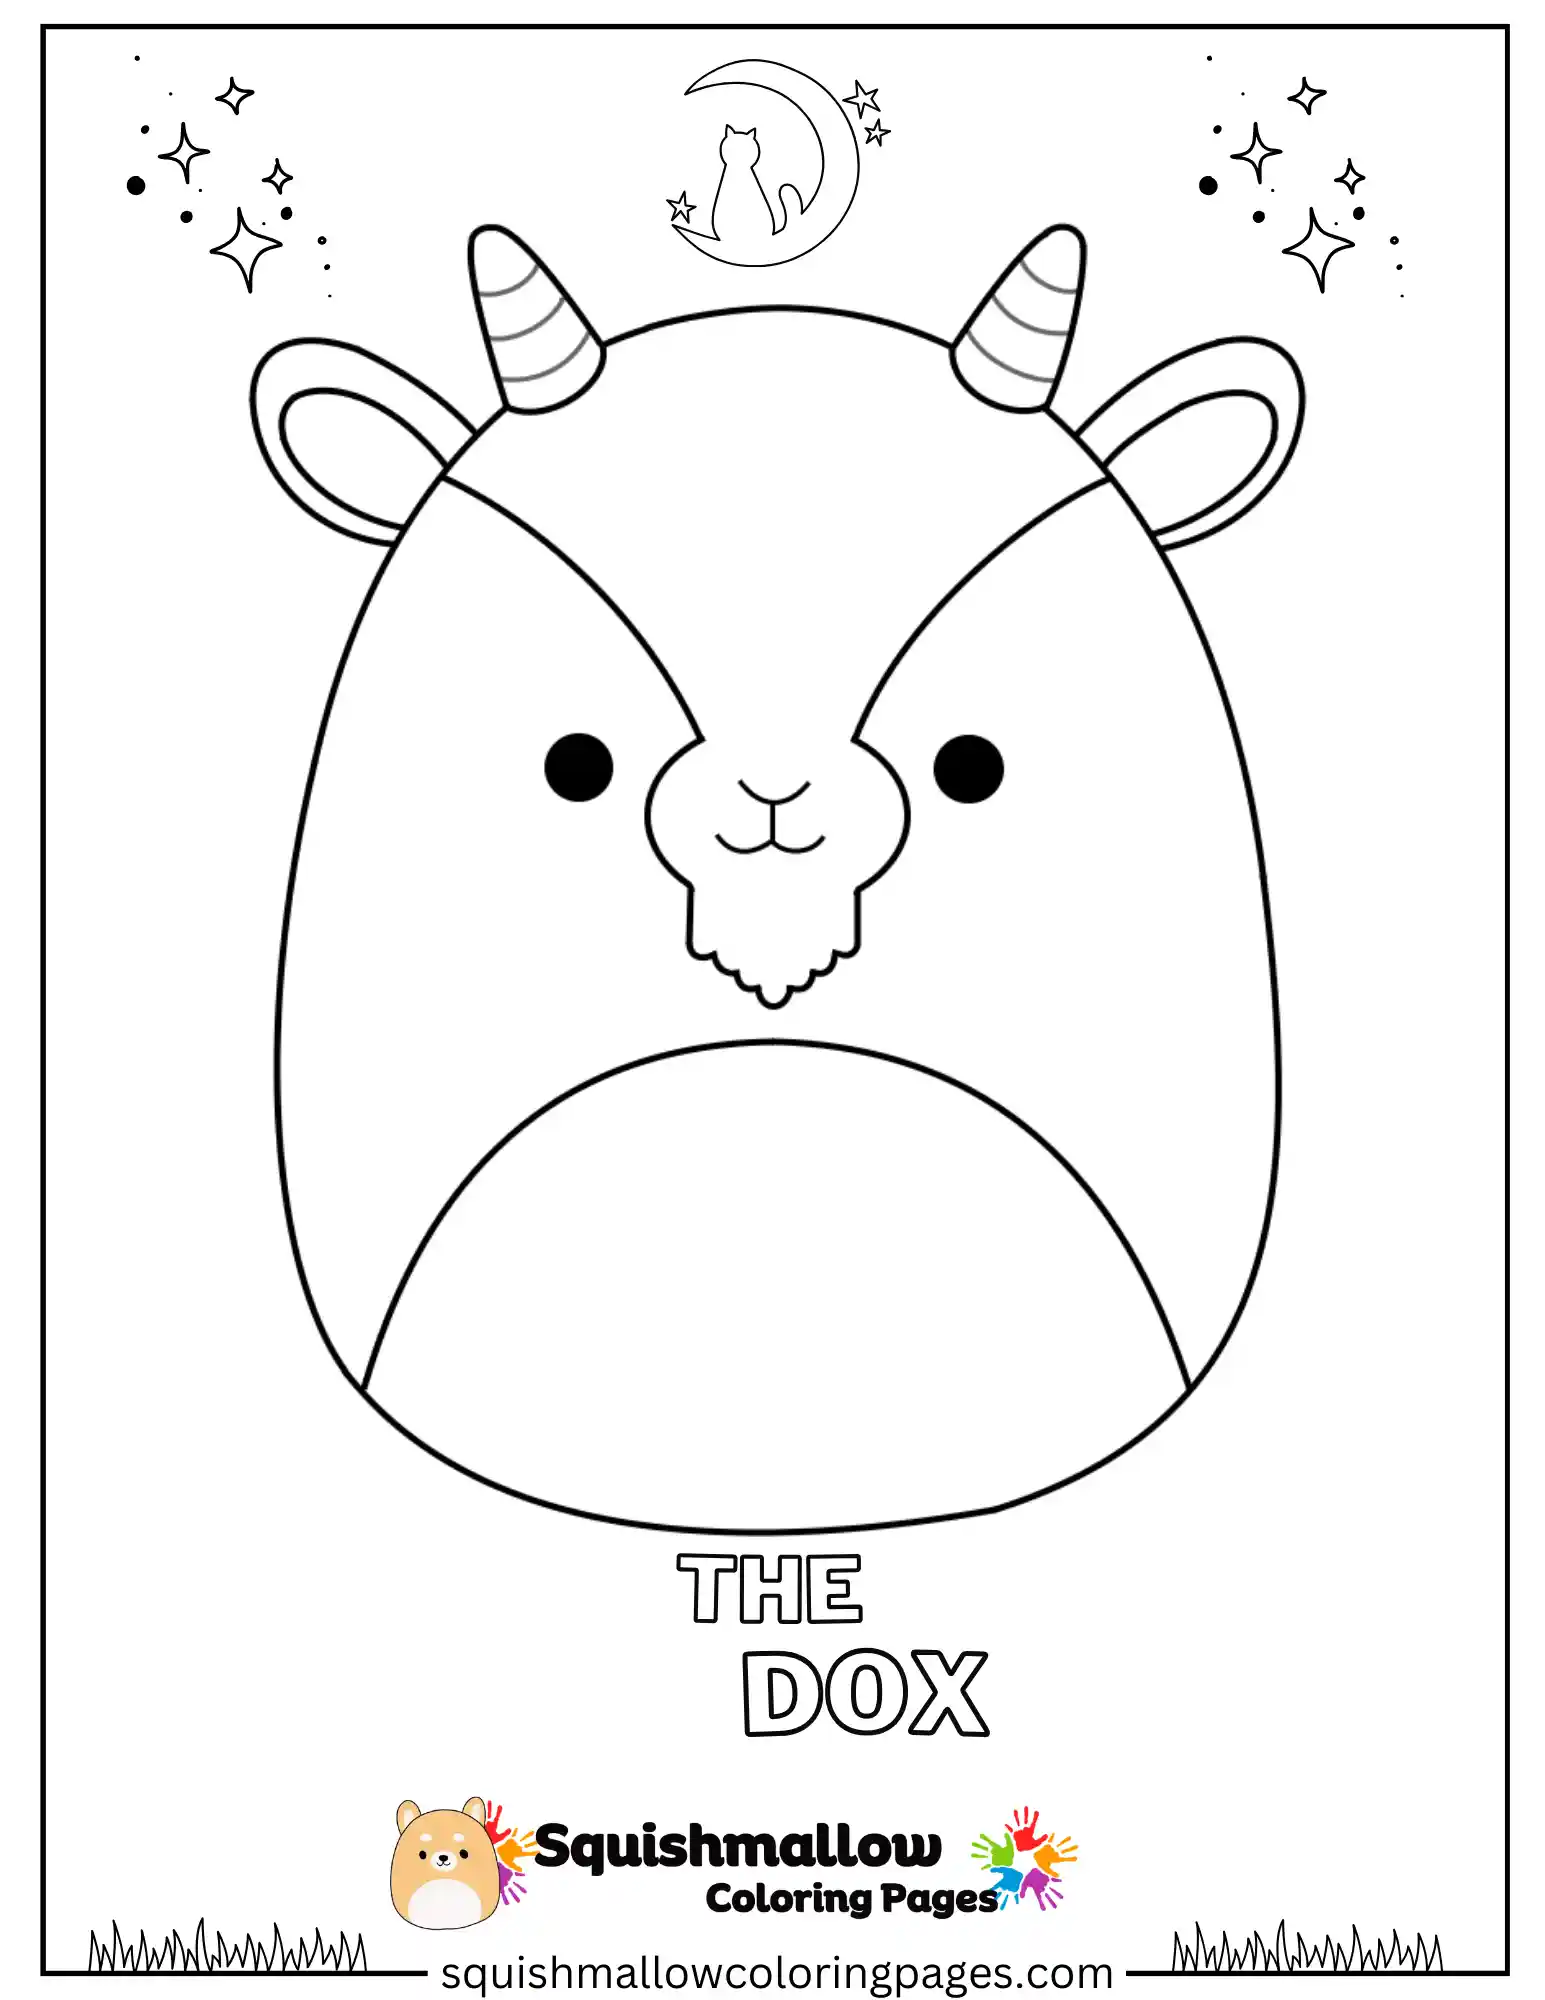 The Dox Squishmallow Coloring Page